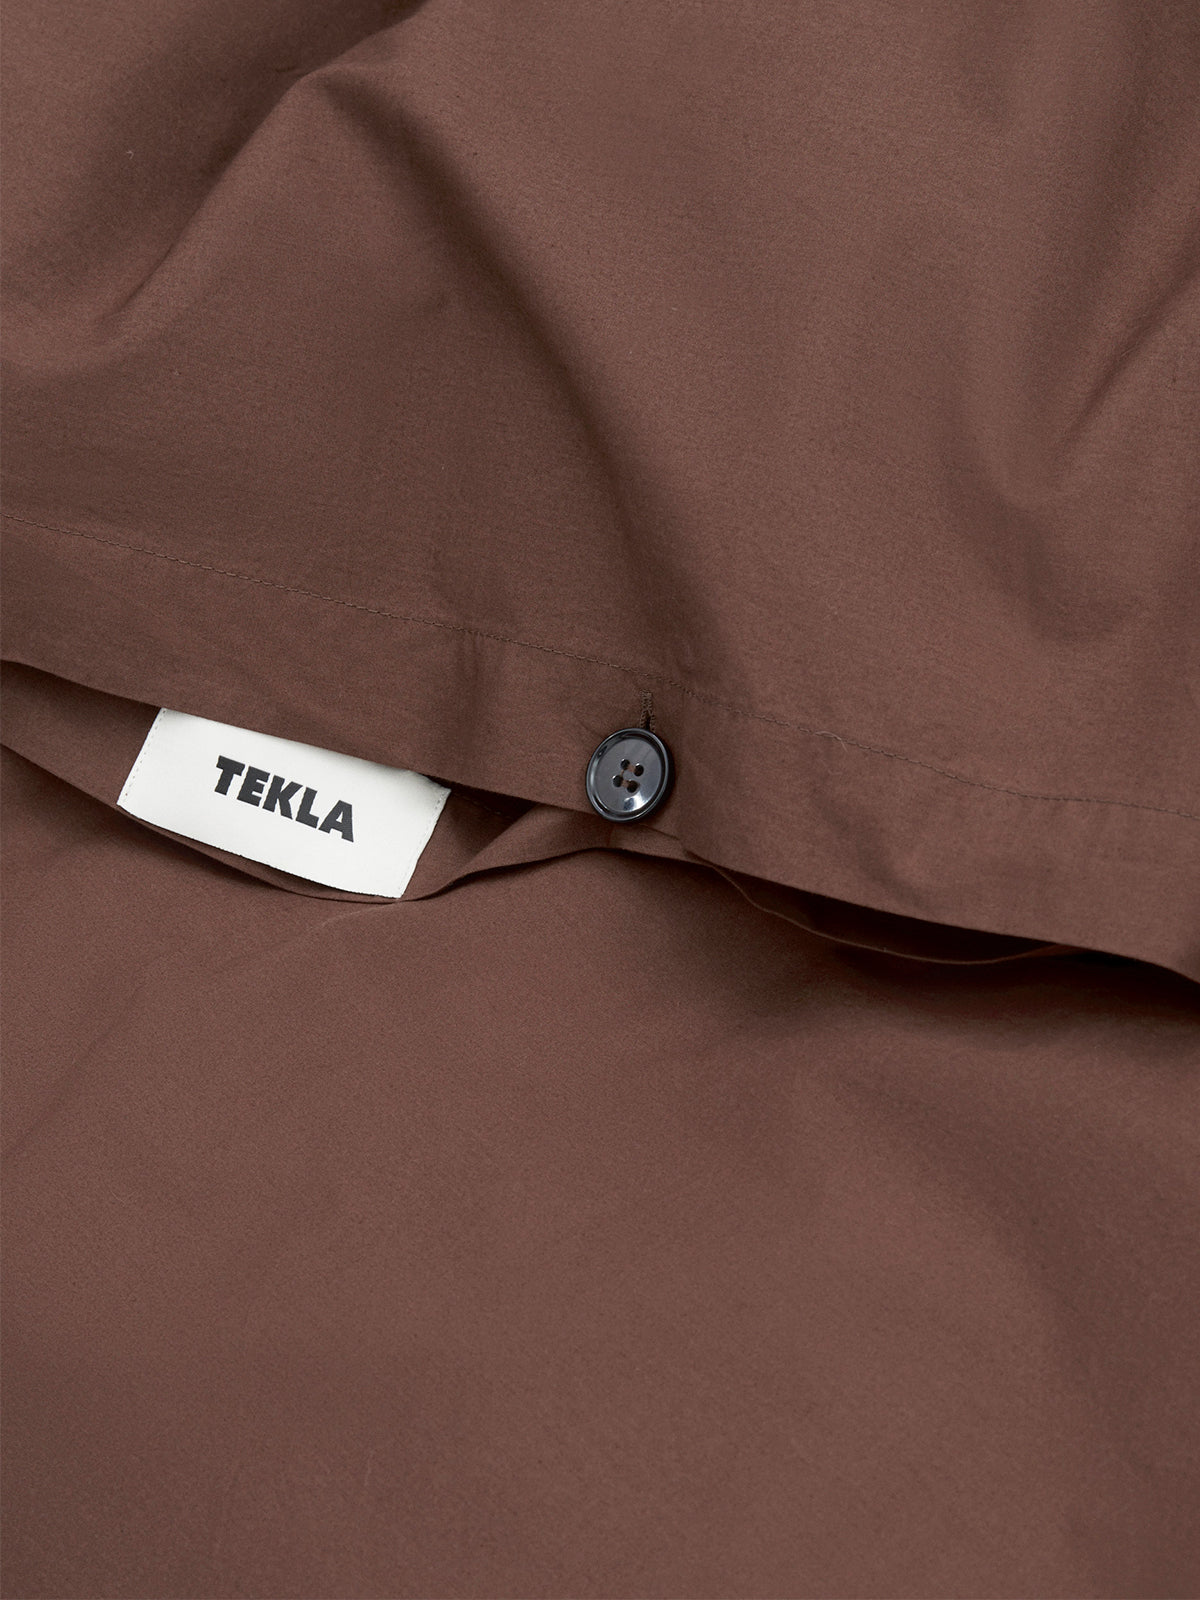 Percale Duvet Cover in Cocoa Brown